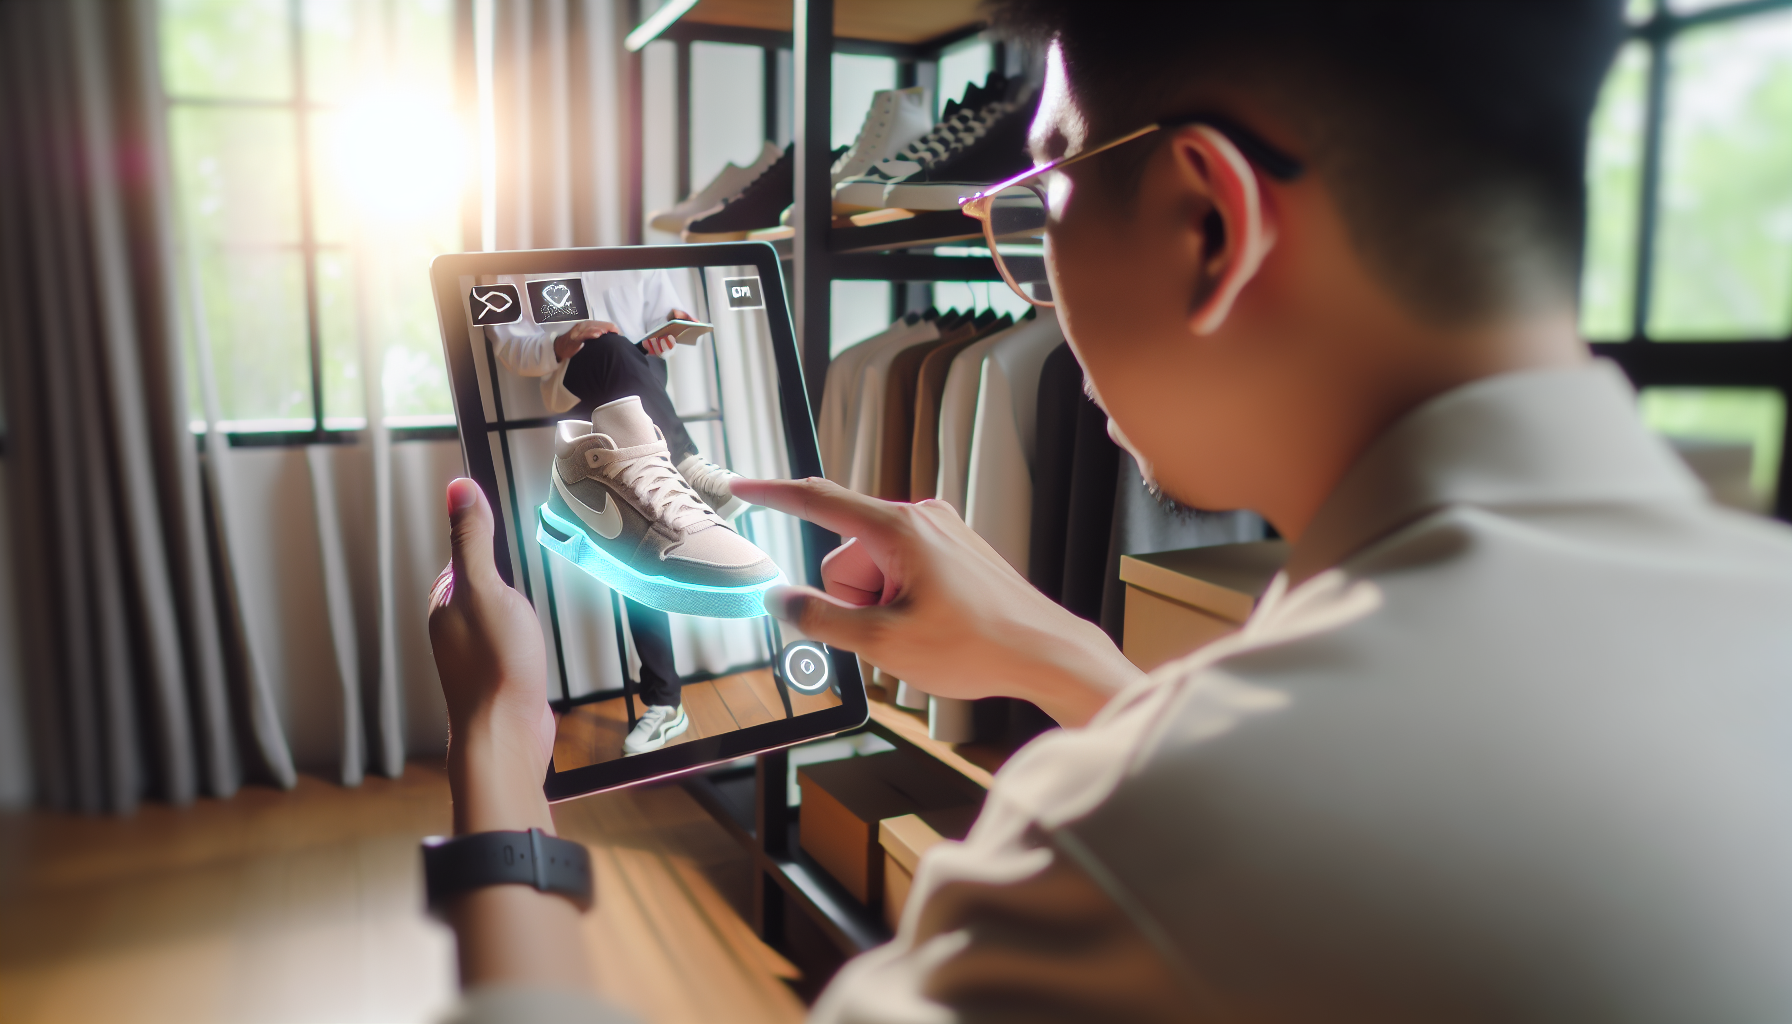 Enhanced online shopping experience with AR technology